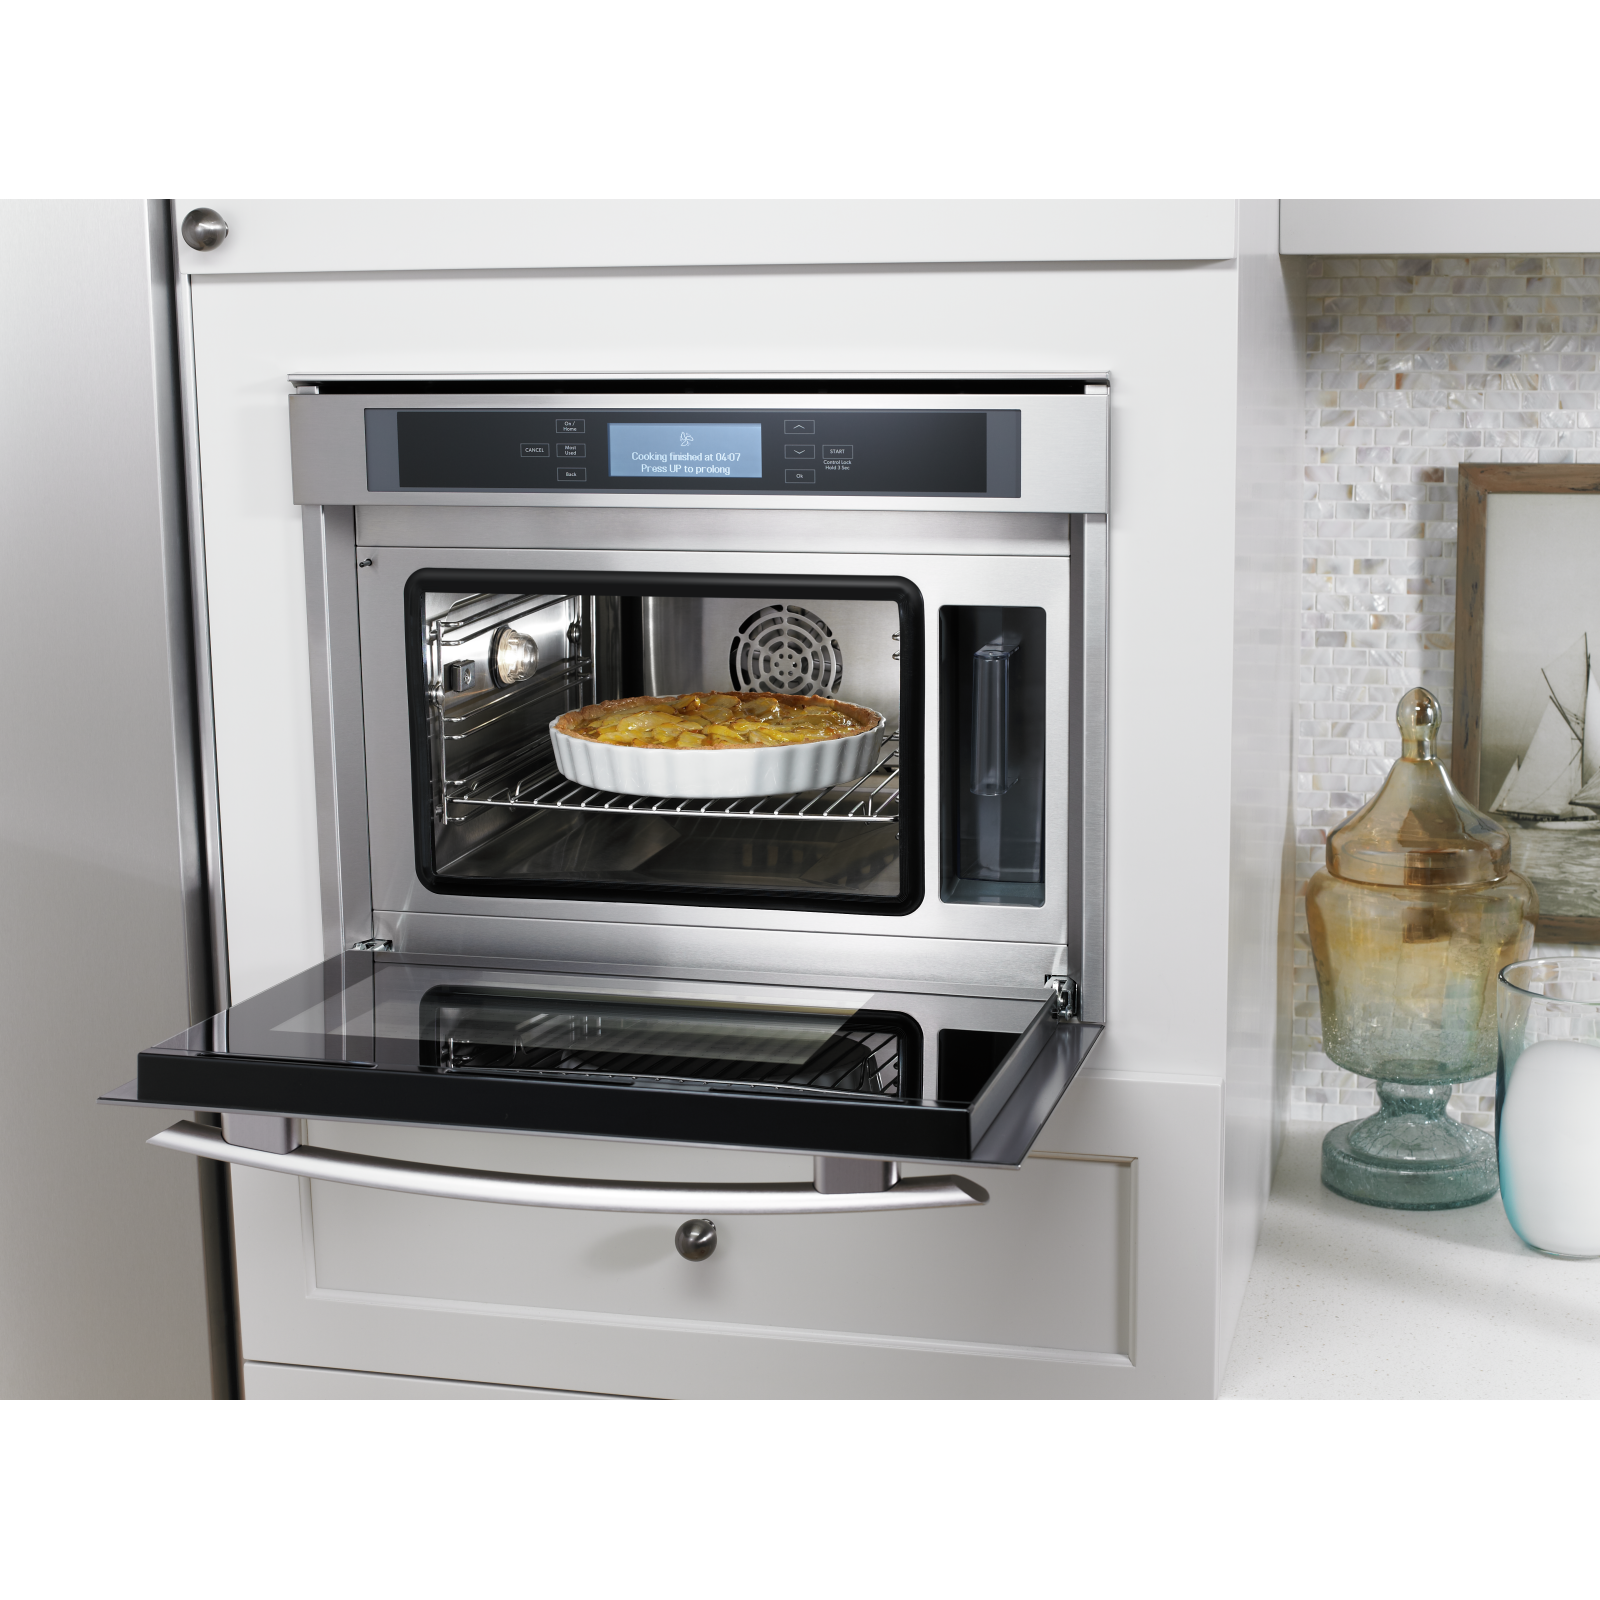 JennAir - 1.3 cu. ft Steam Wall Oven in Stainless - JBS7524BS